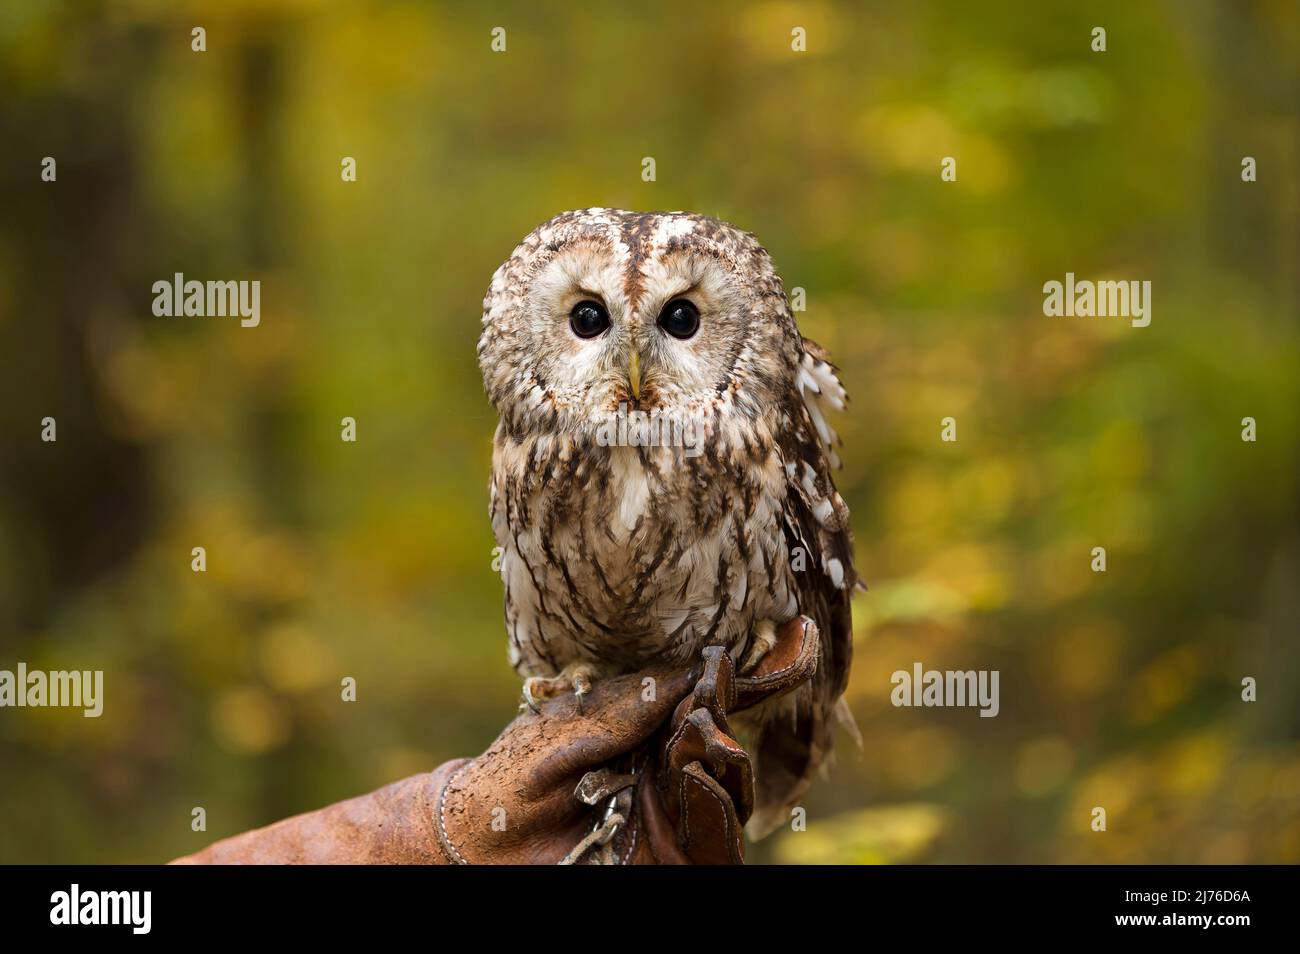 Tawny owl (Strix aluco), sitting on falconer's leather glove, captive, colorful autumn leaves in background, Bispingen Bird of Prey Enclosure, Lüneburger Heide, Germany, Lower Saxony Stock Photo